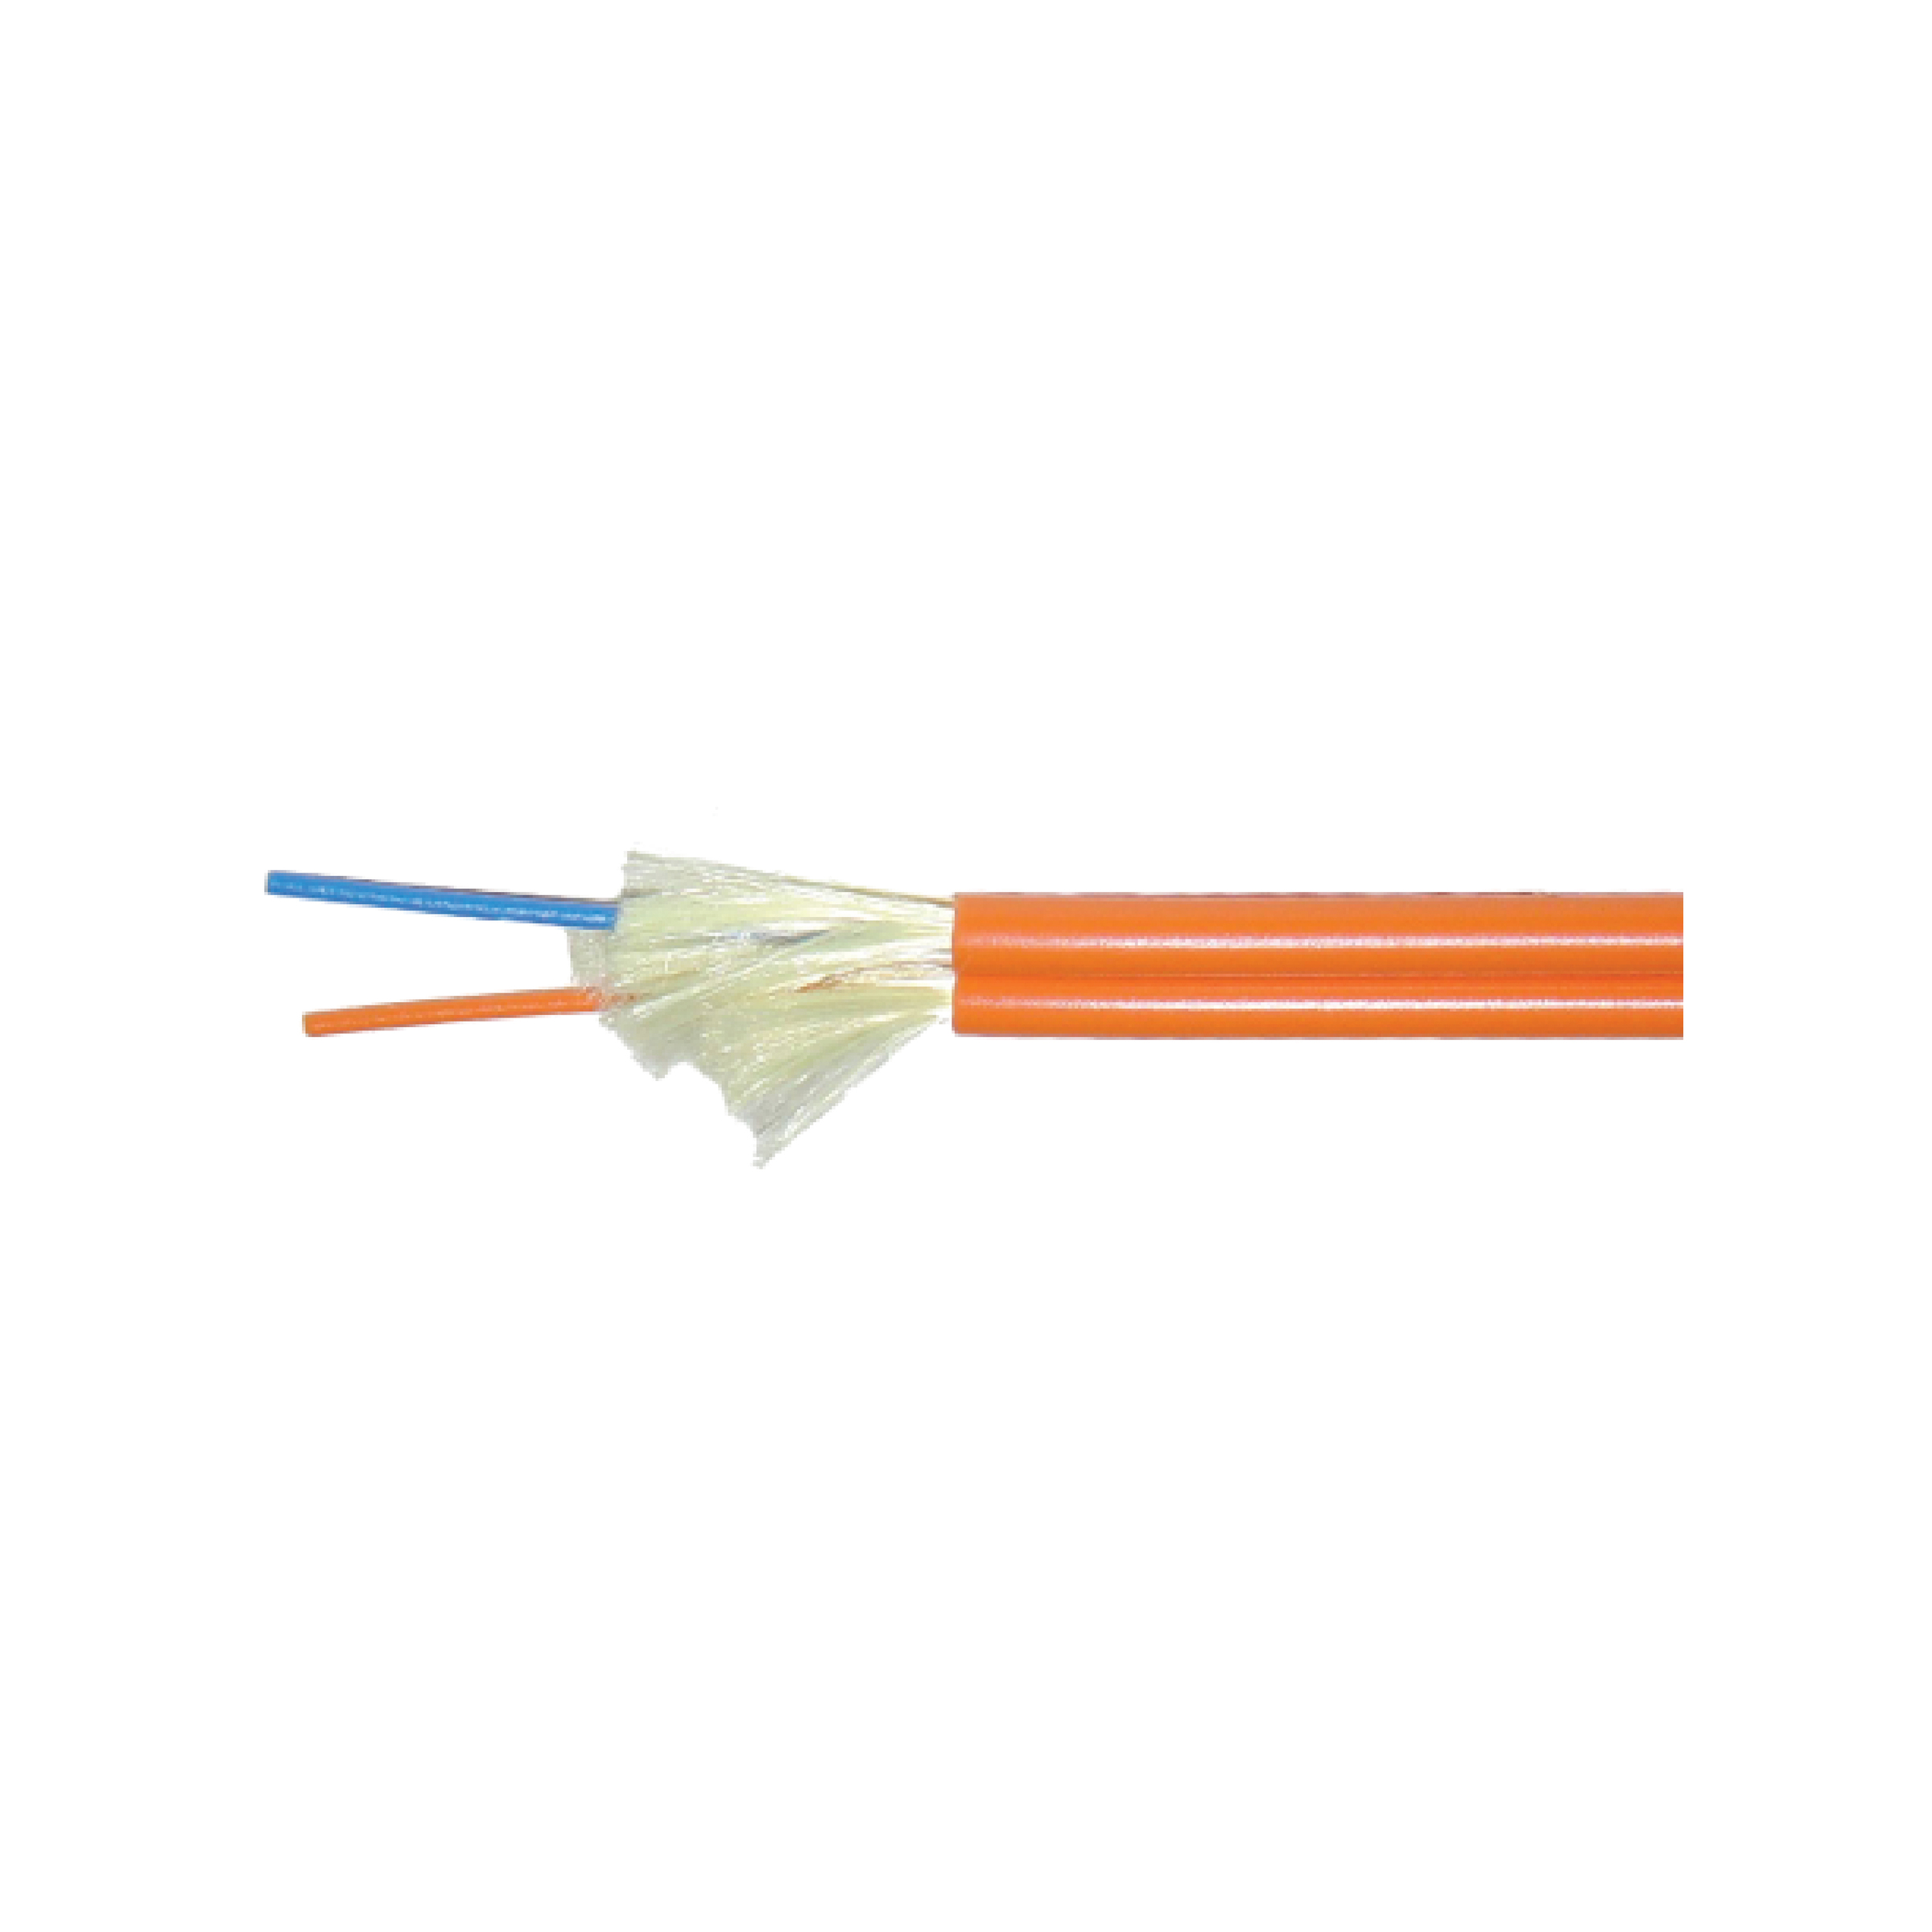 Fiber Optic Cable_Duplex Assembly Cable.jpg